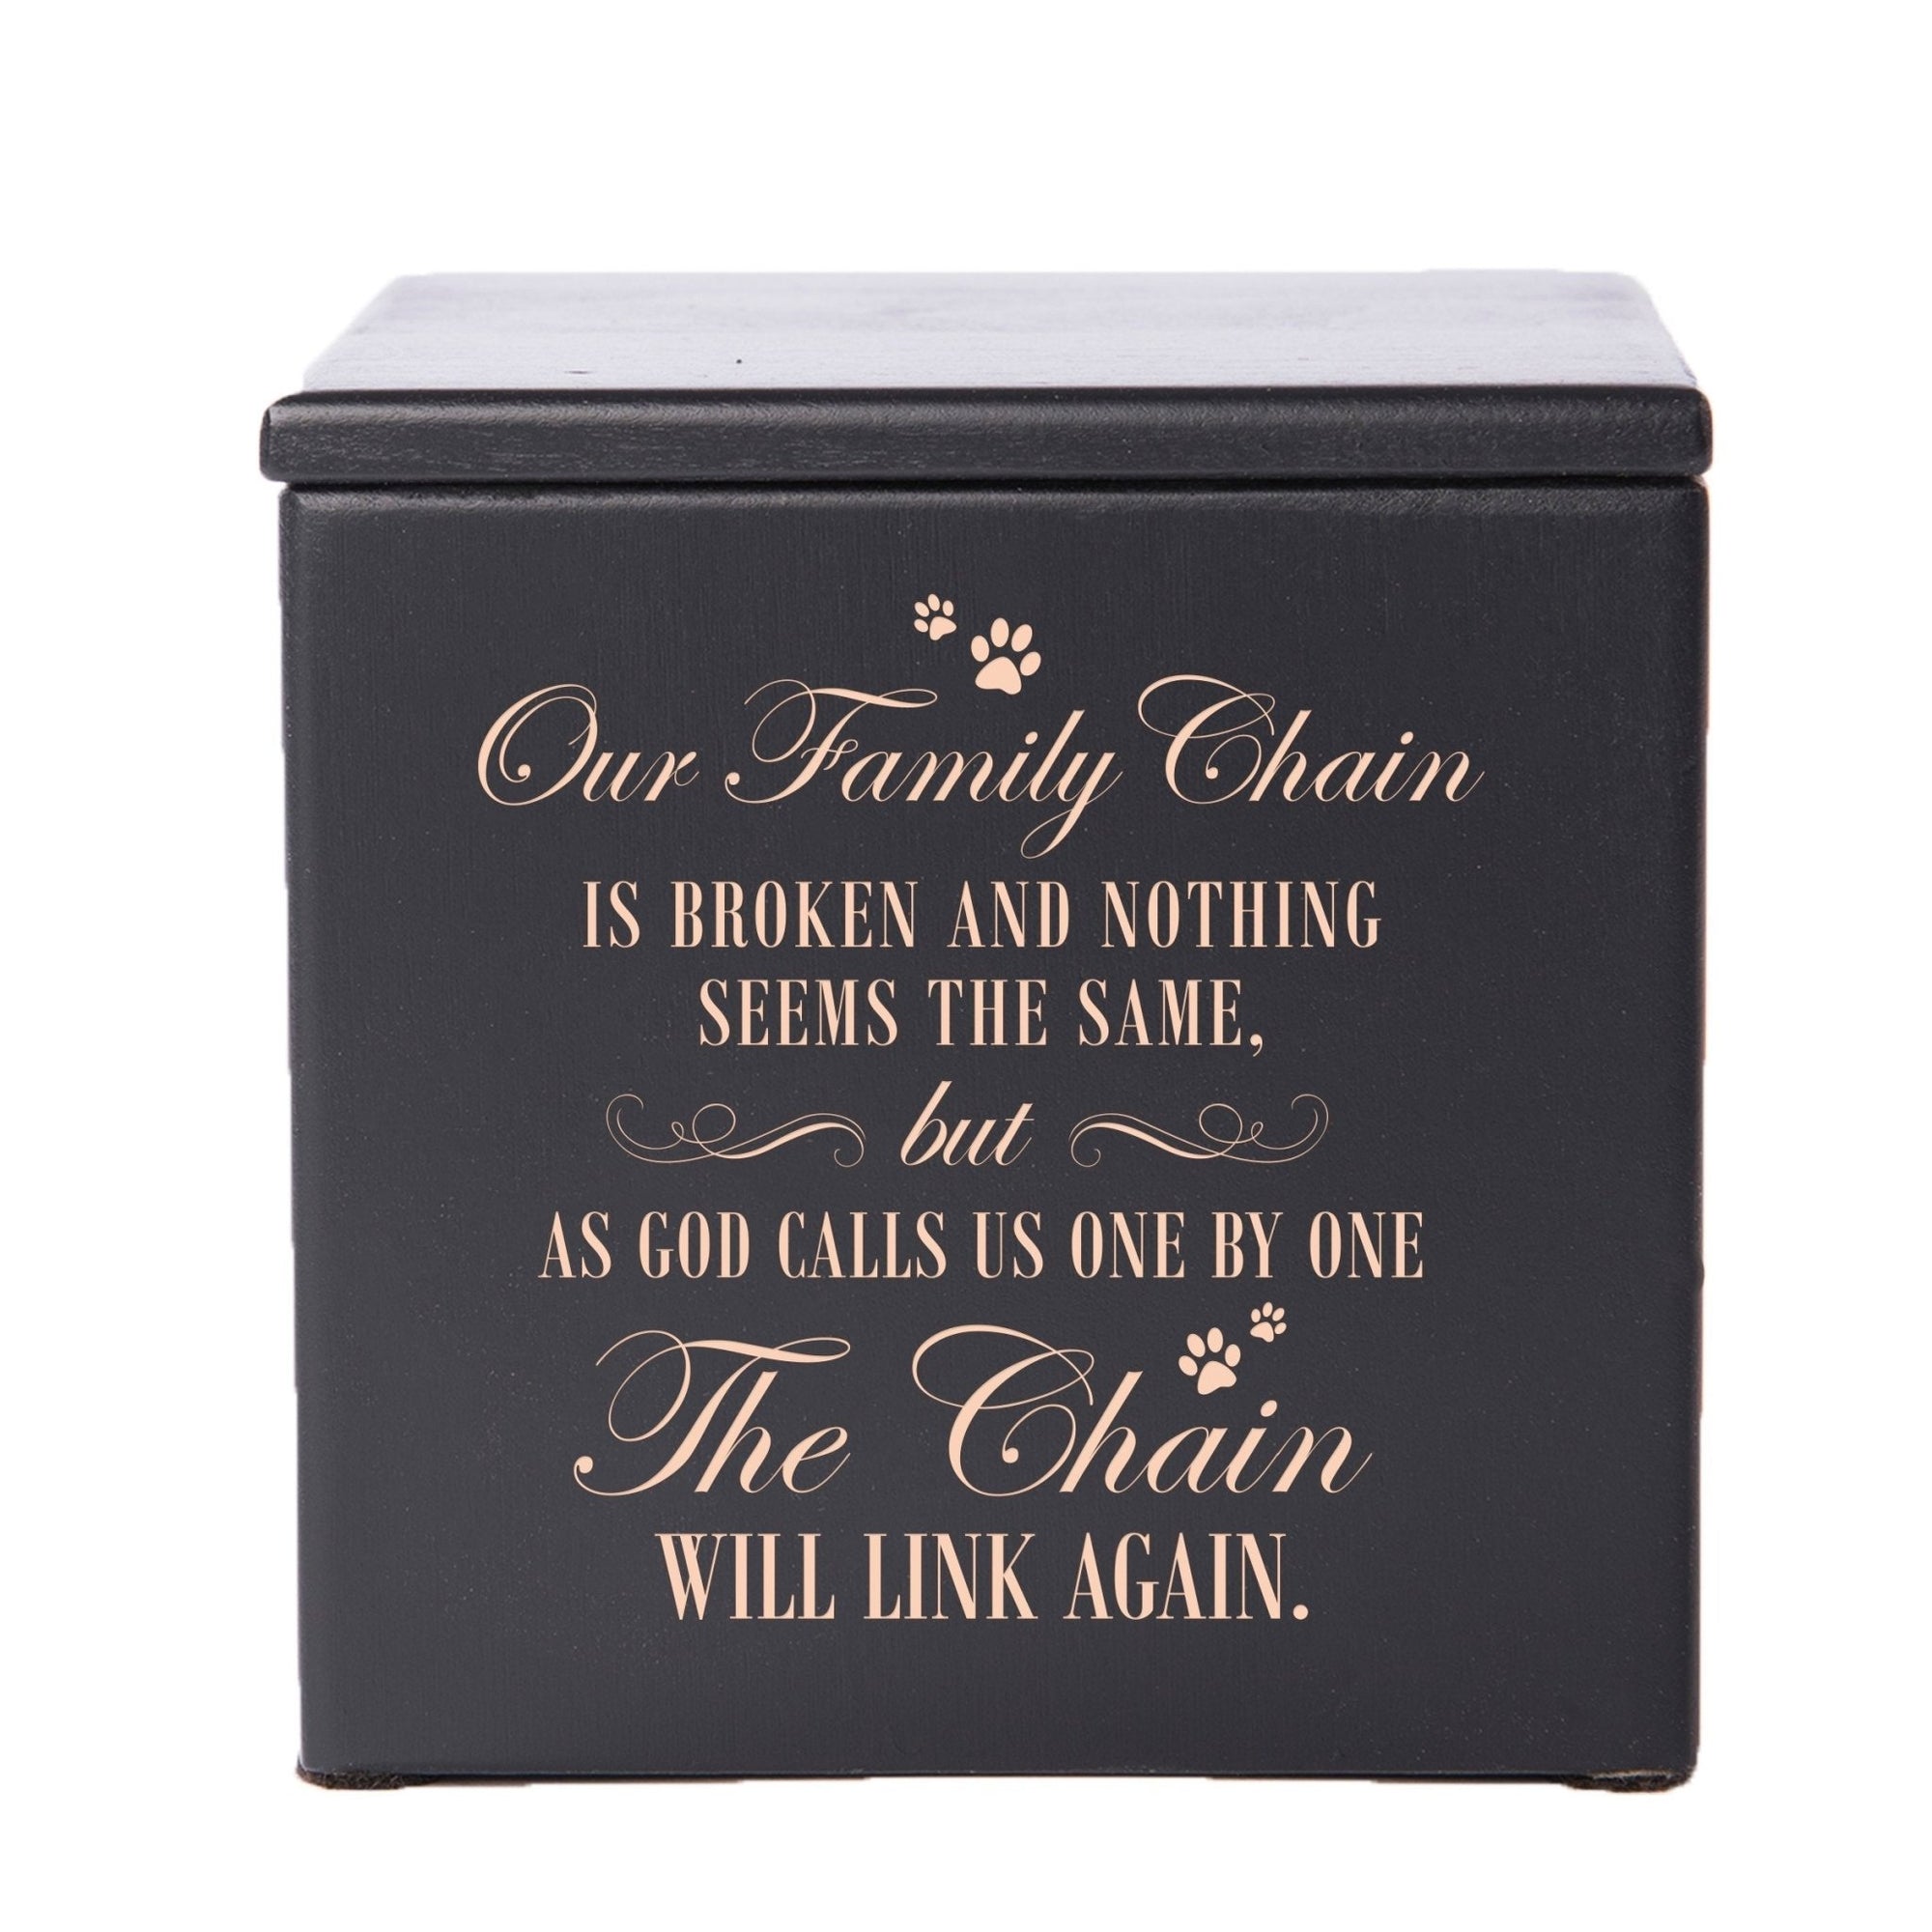 Pet Memorial Keepsake Cremation Urn Box for Dog or Cat - Our Family Chain Is Broken - LifeSong Milestones